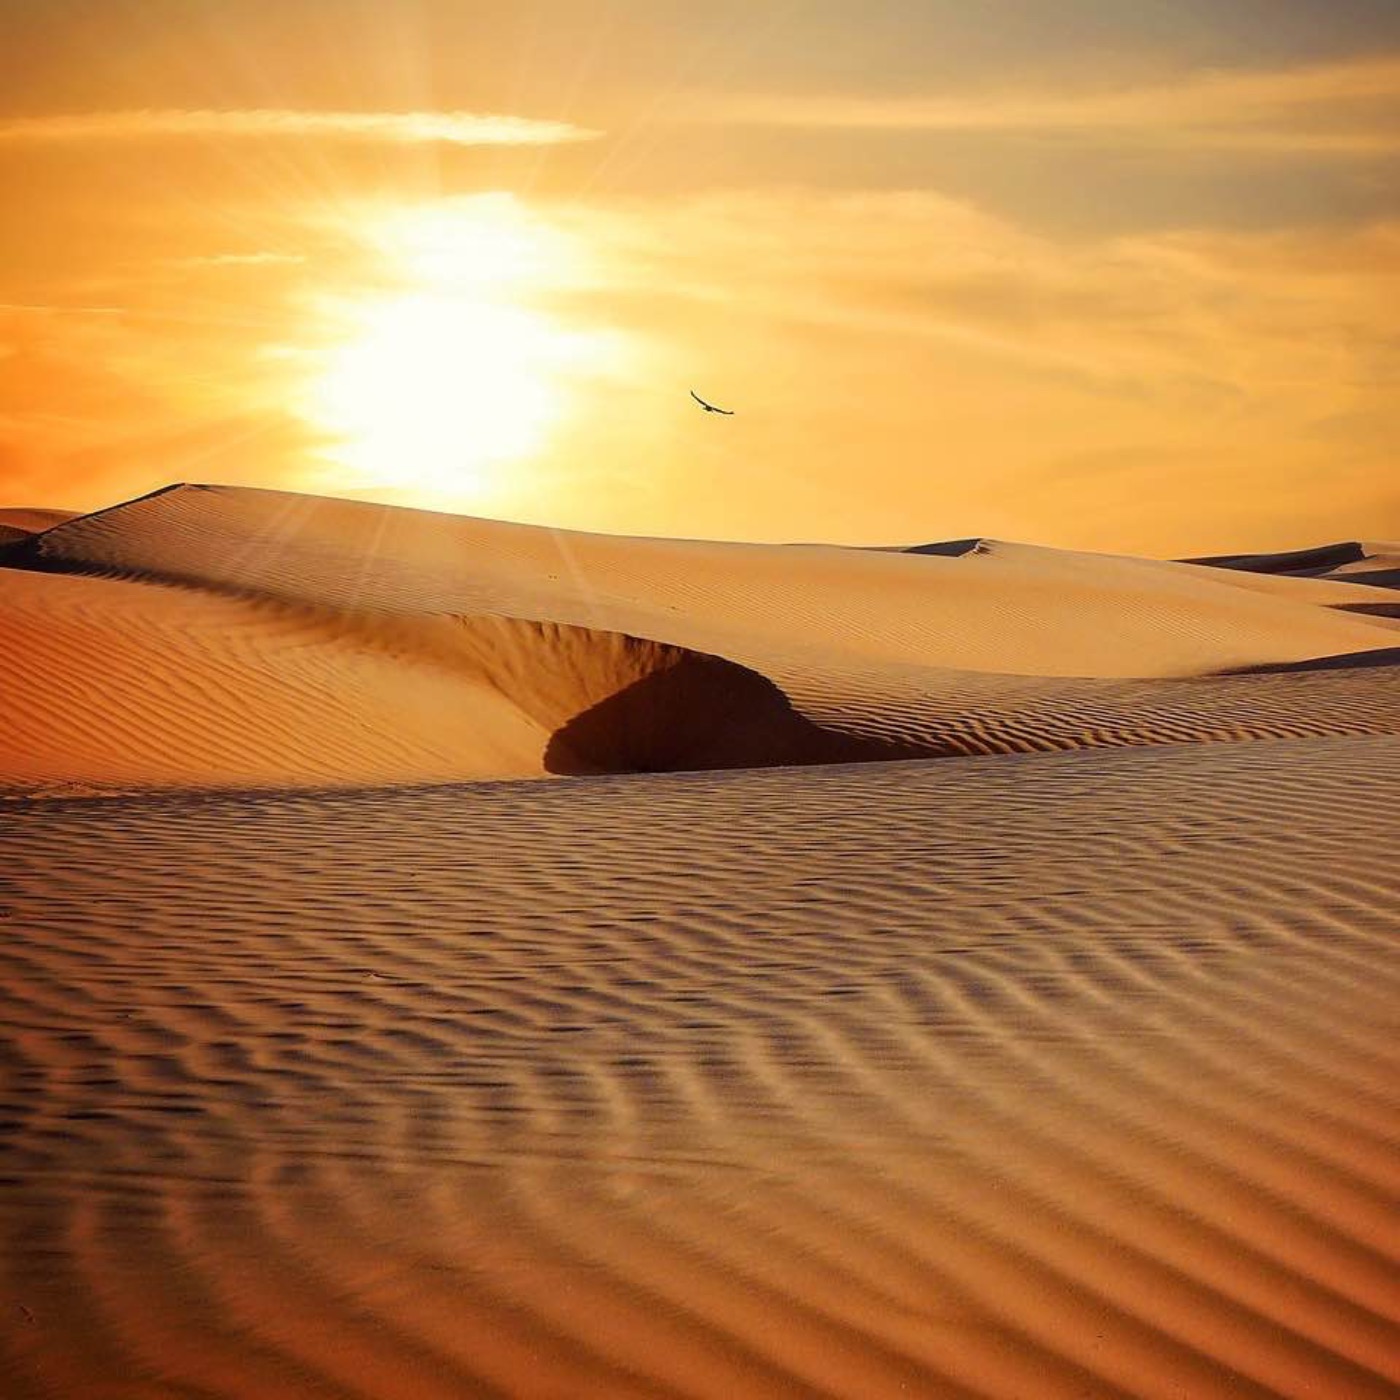 cover art for "desert oasis melodies" - tranquil desert sands and bilateral serene music for sleeping and relaxation